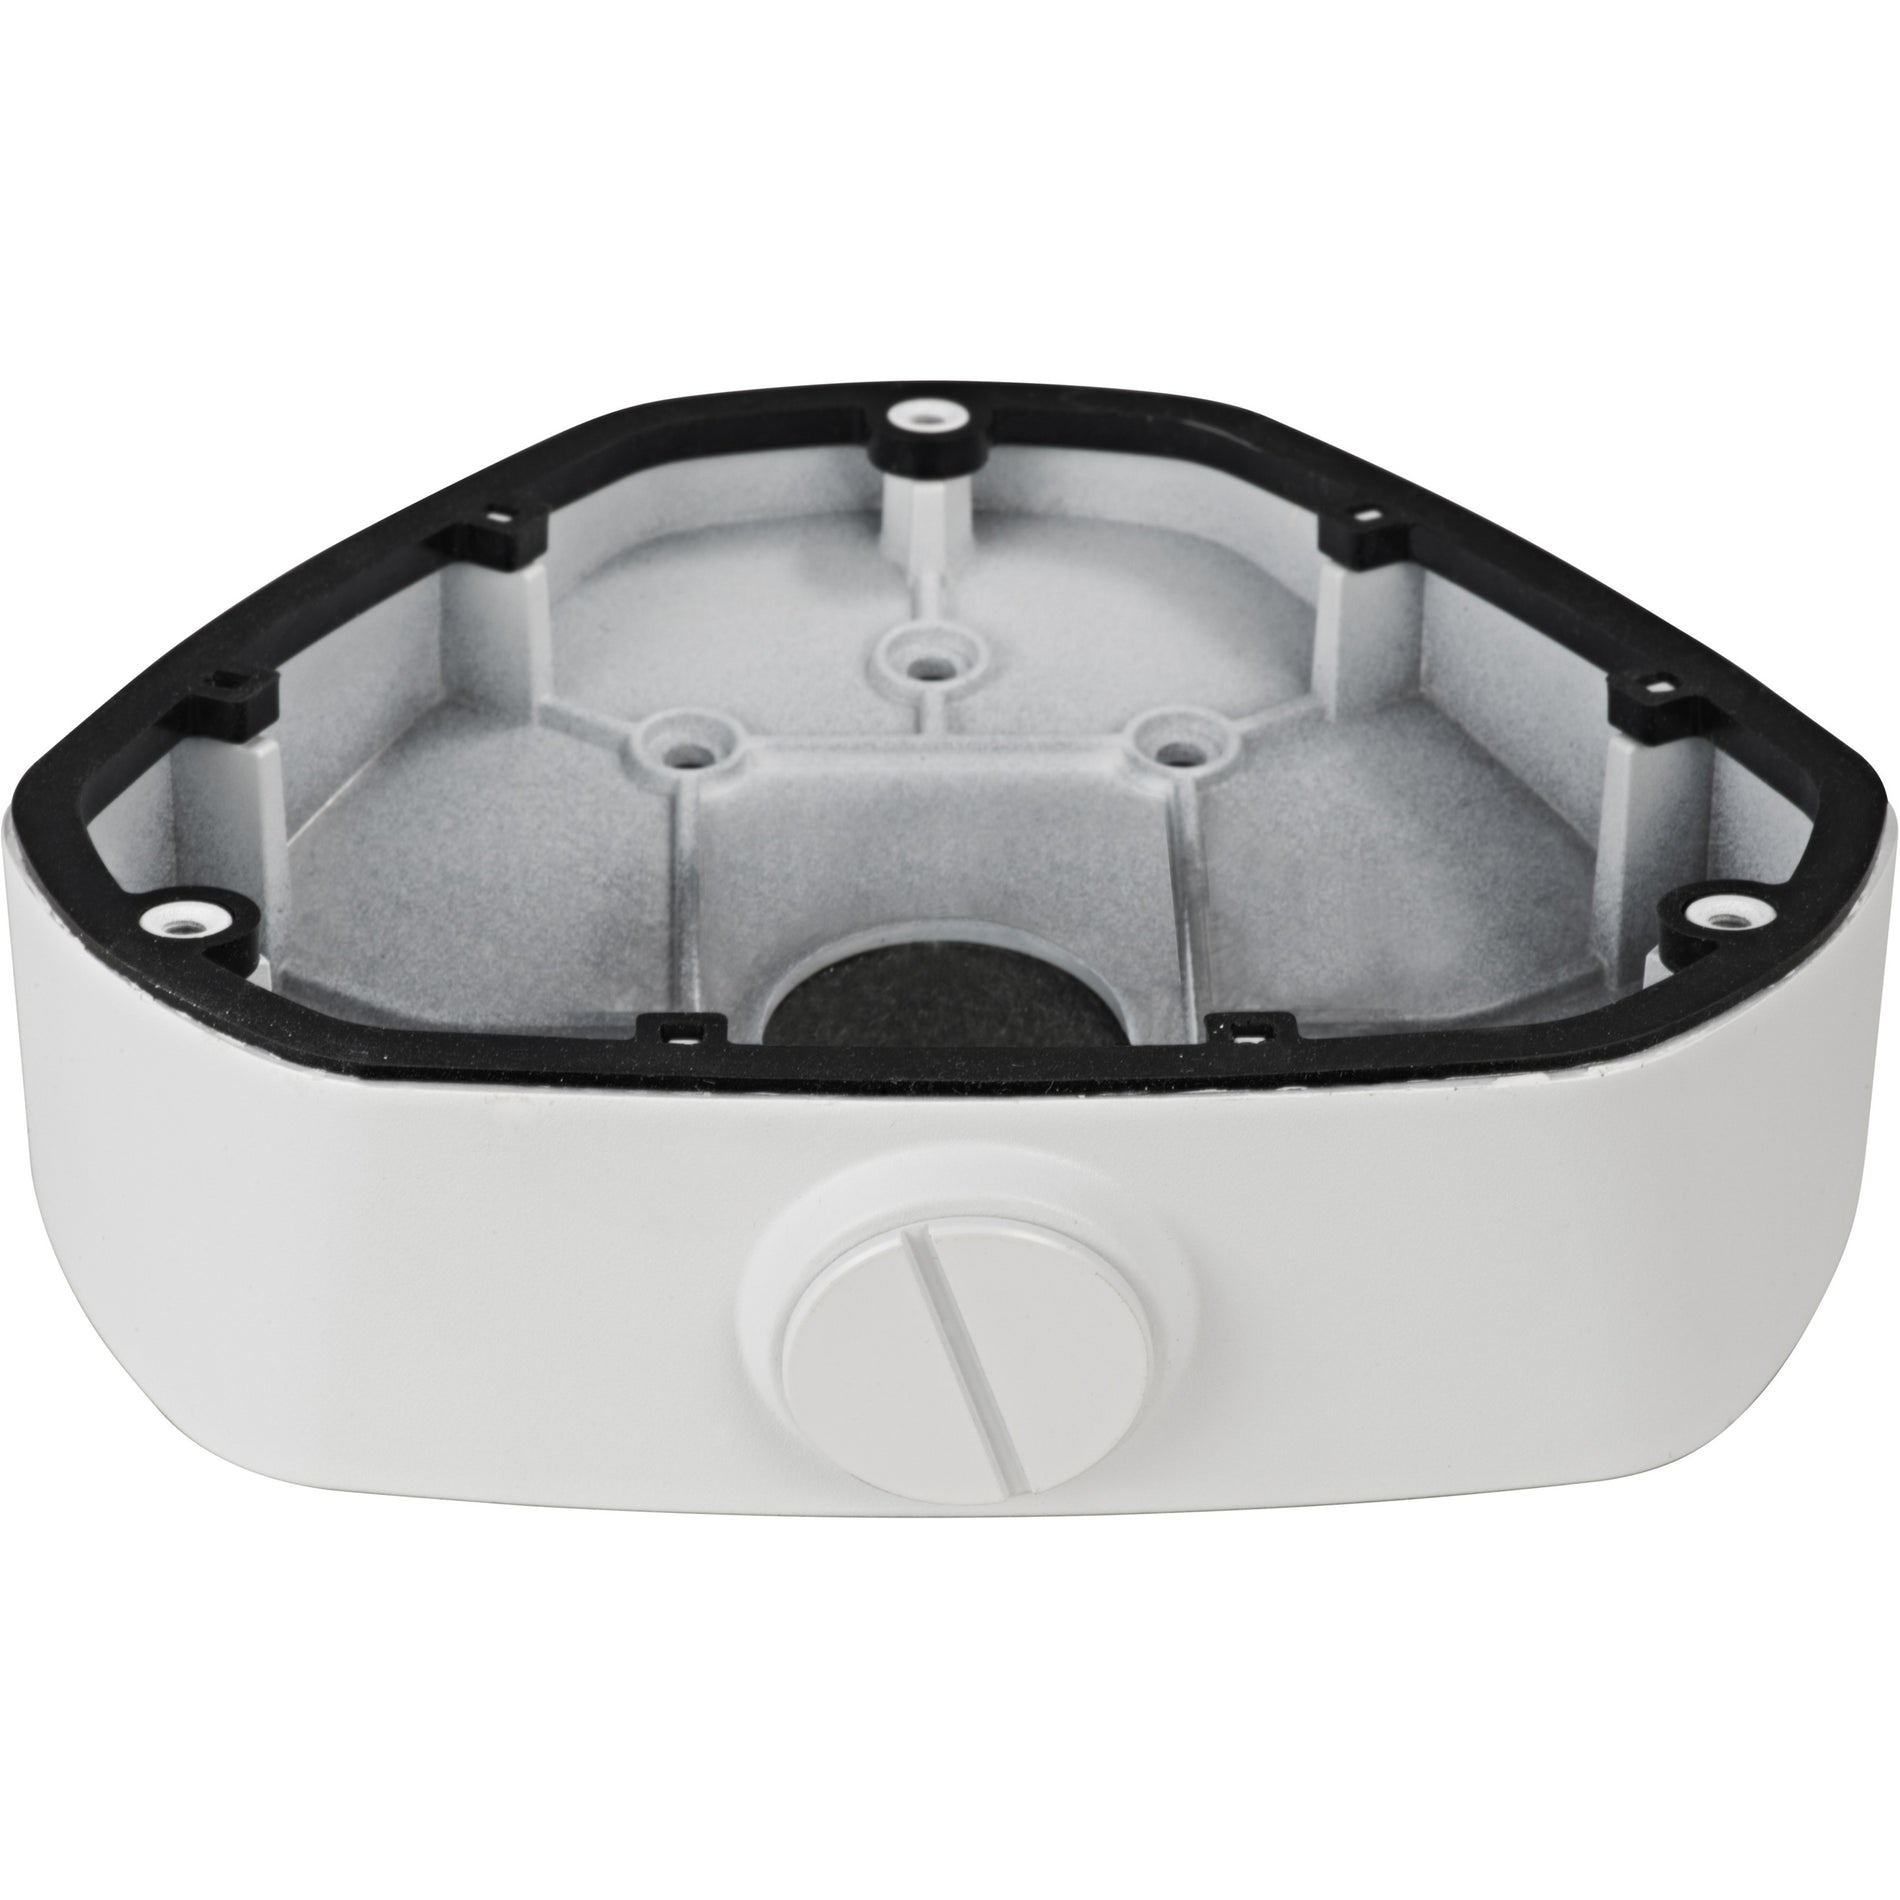 Hikvision AB-FE Inclined Ceiling Mount for Fisheye (Angled Base), Compatible with Hikvision Network Cameras